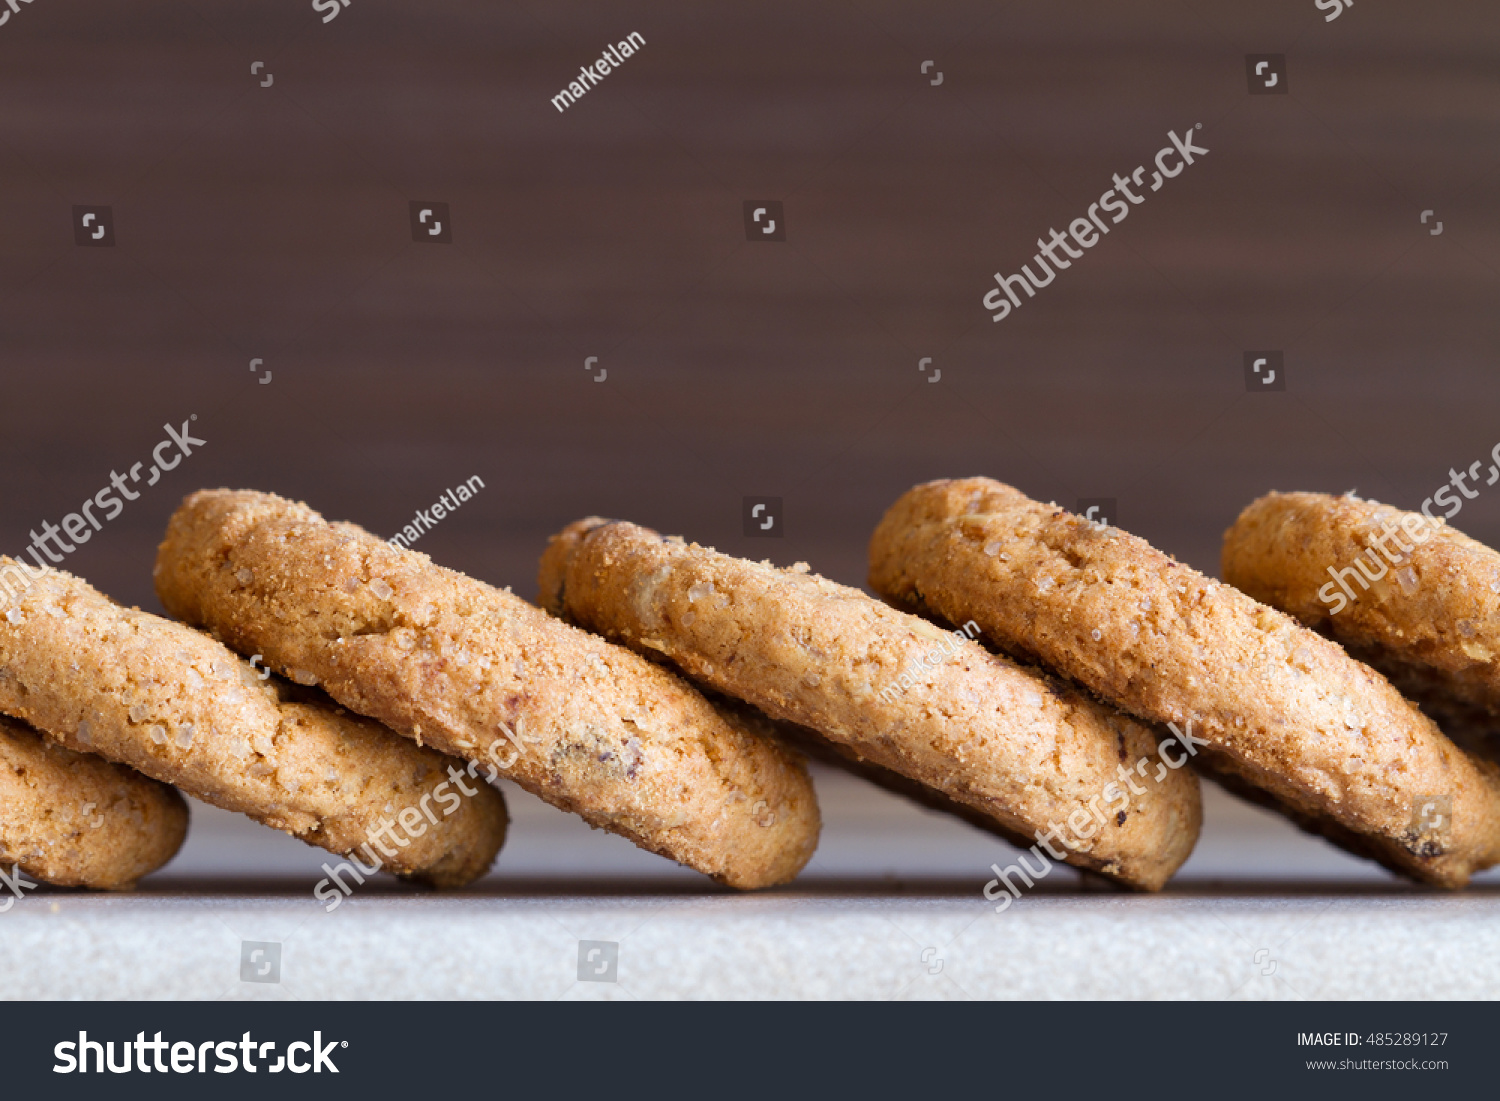 Several chocolate chip cookies on dark background. Close-up #485289127